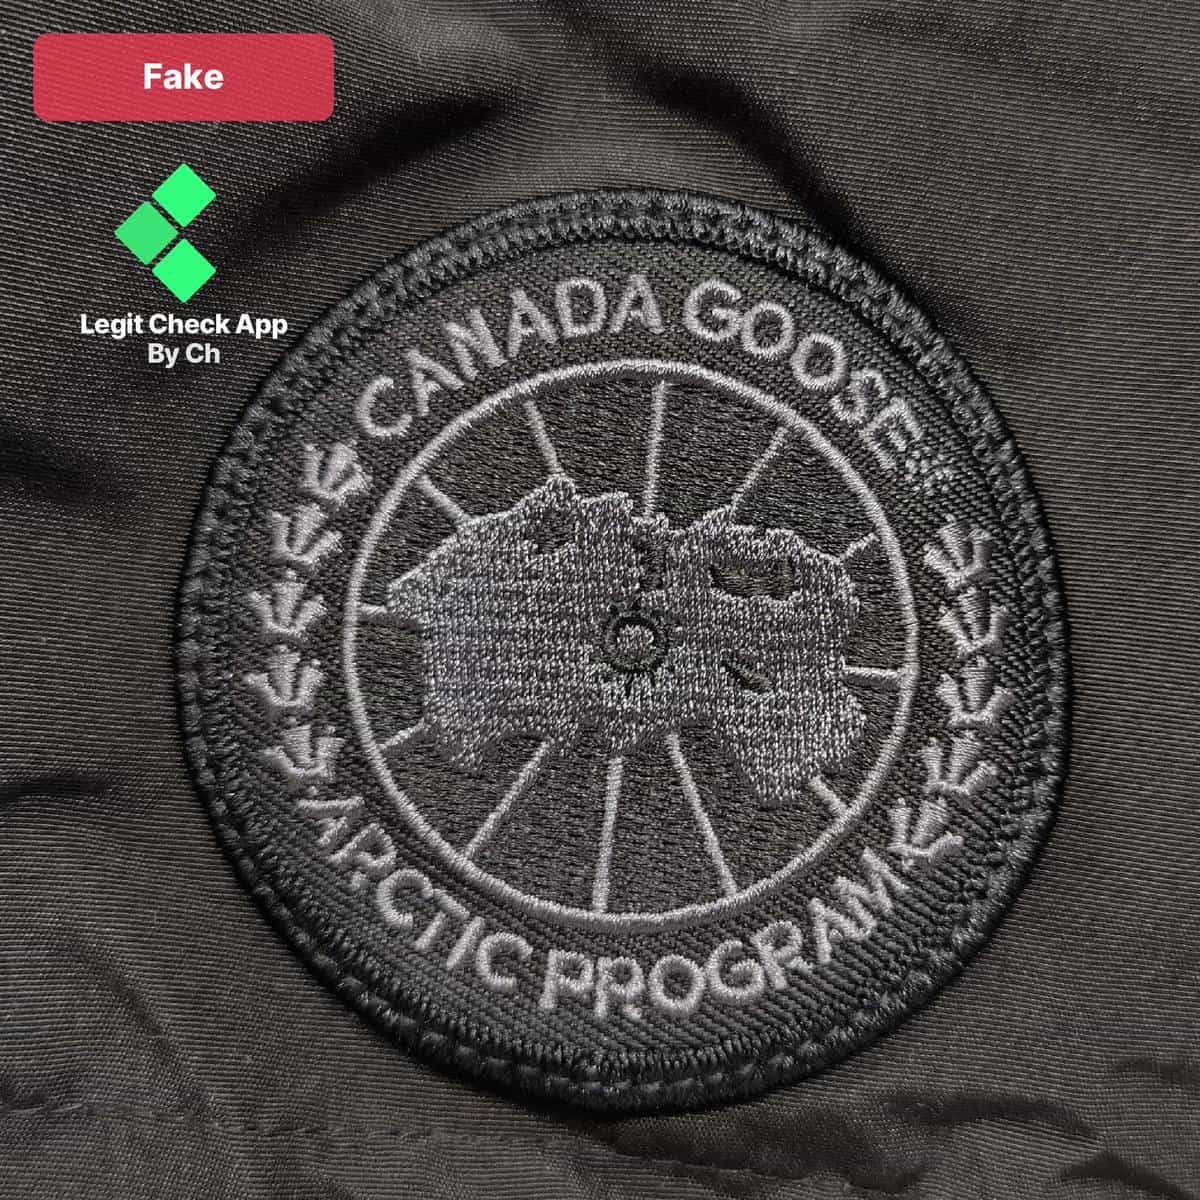 How To Tell Real Vs Fake Canada Goose Black Label Items - Legit Check By Ch